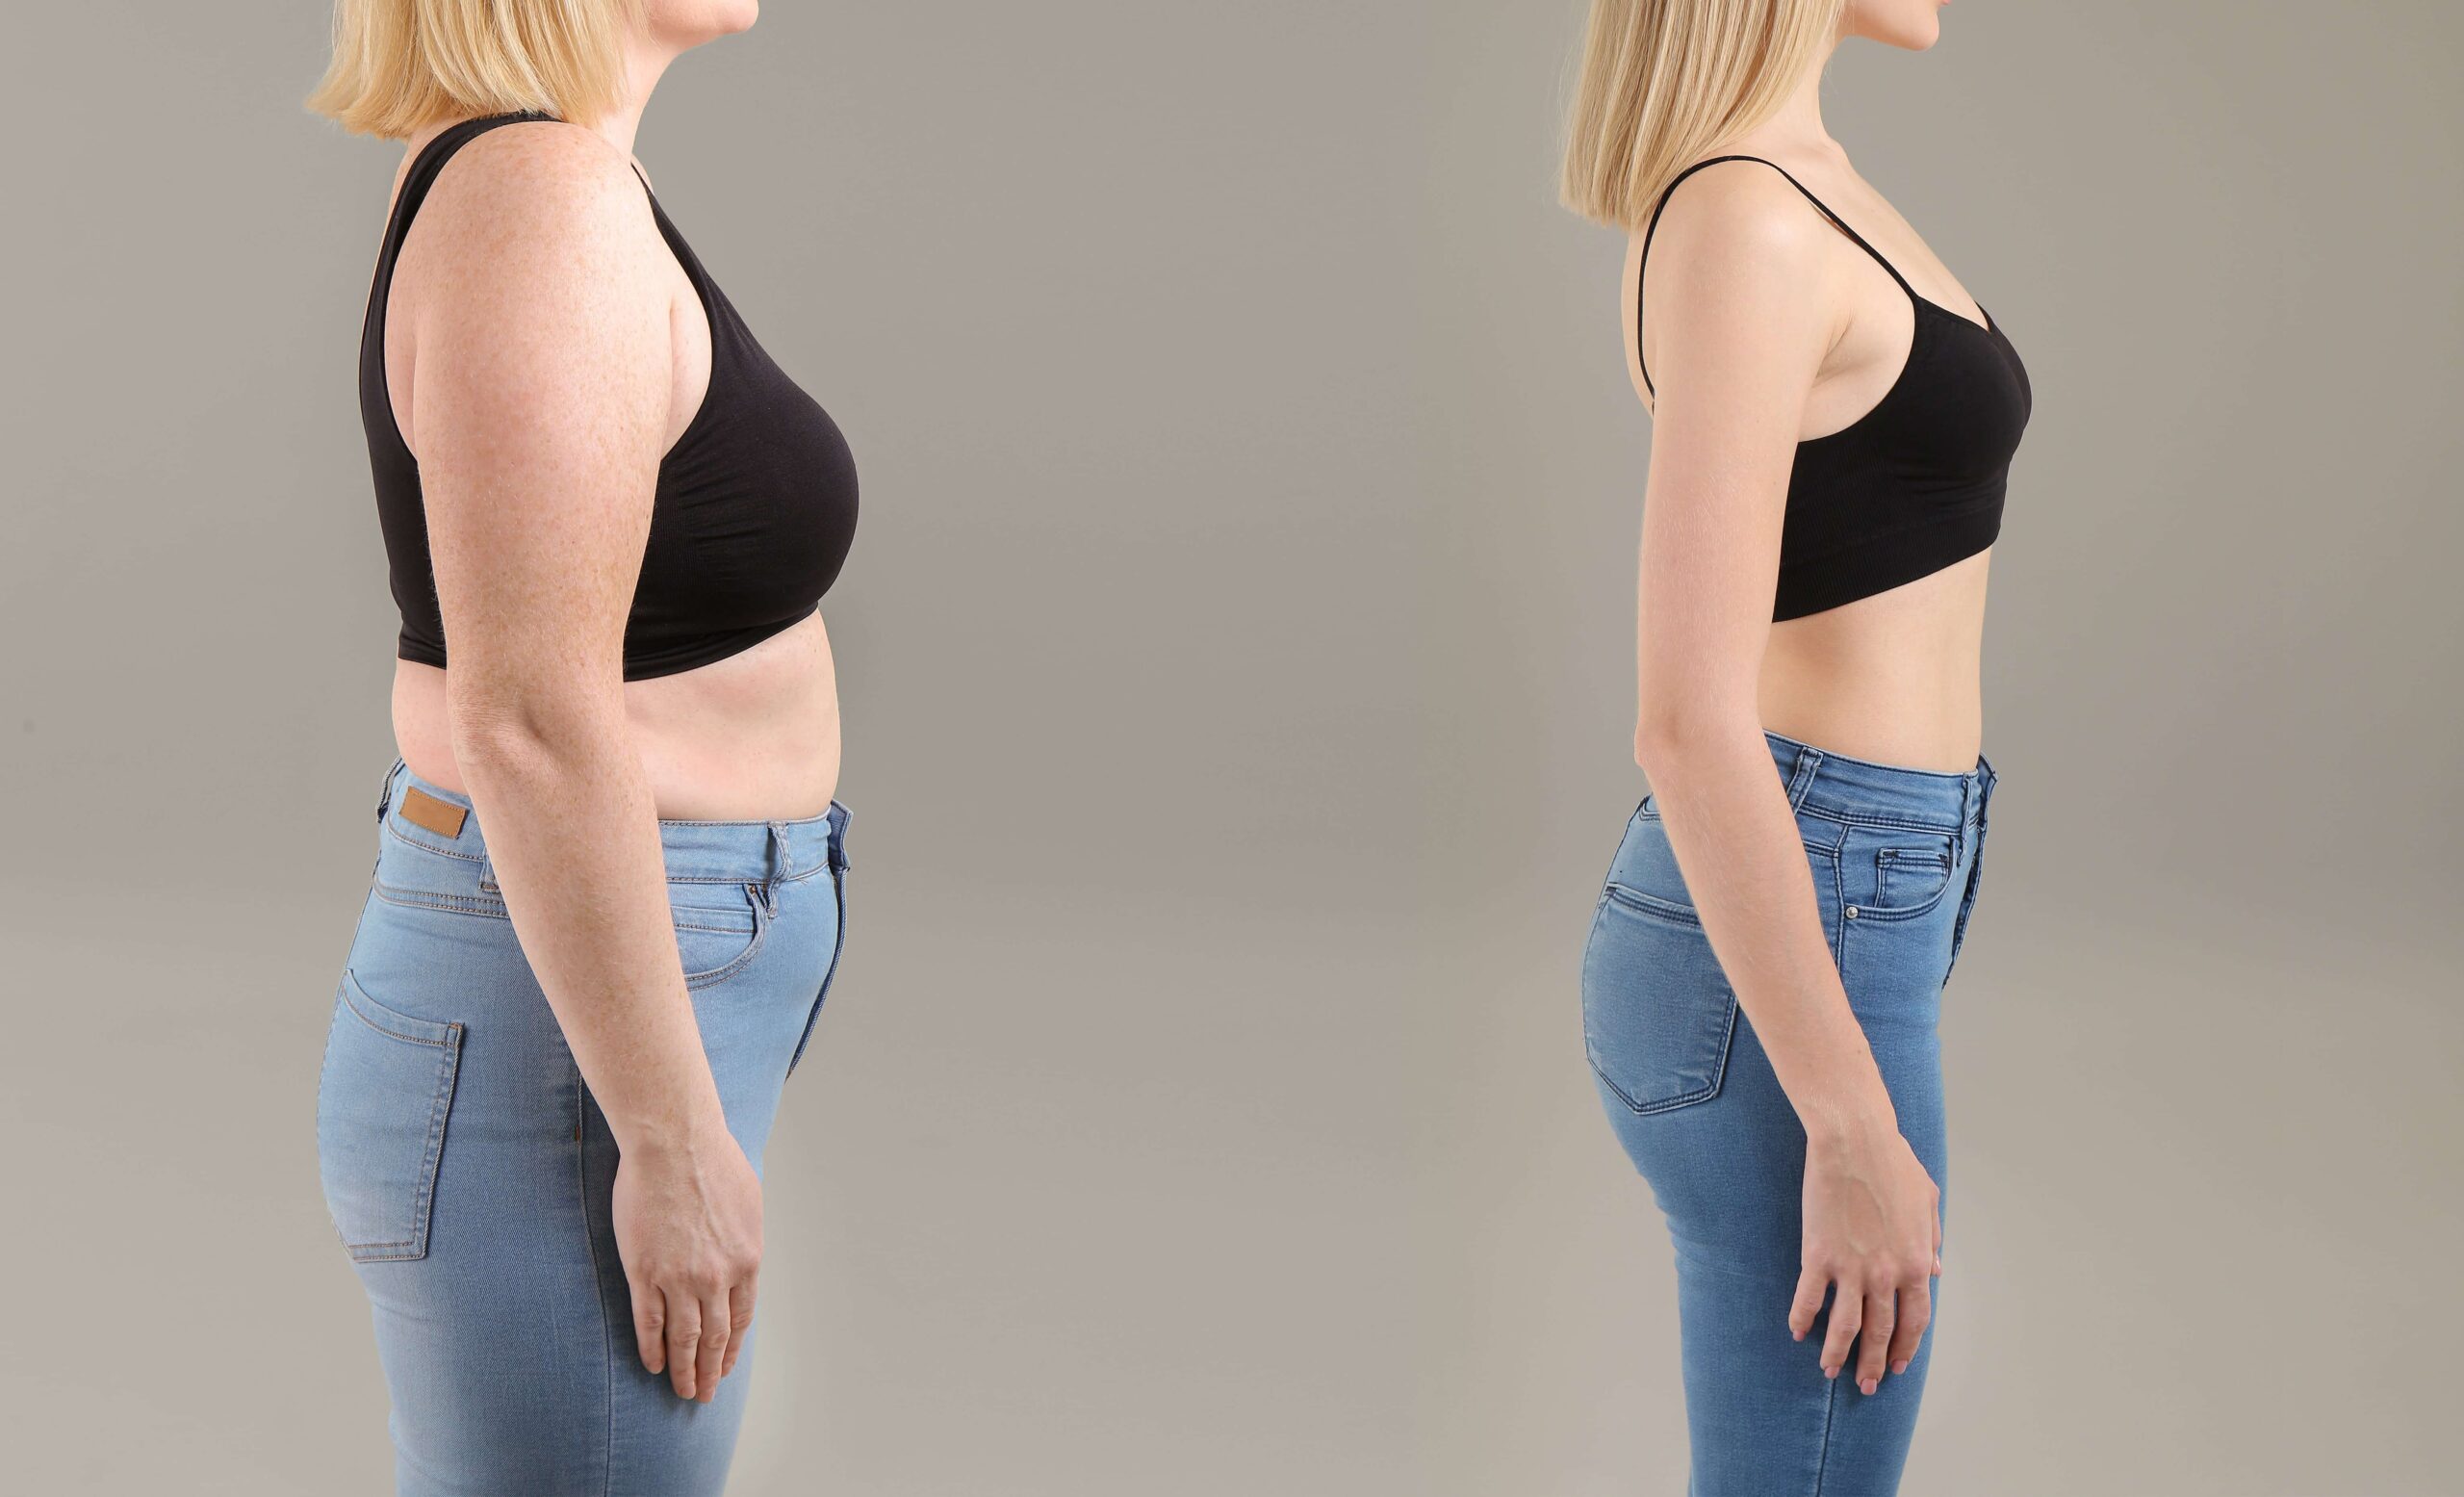 Before and after results of a tummy tuck.